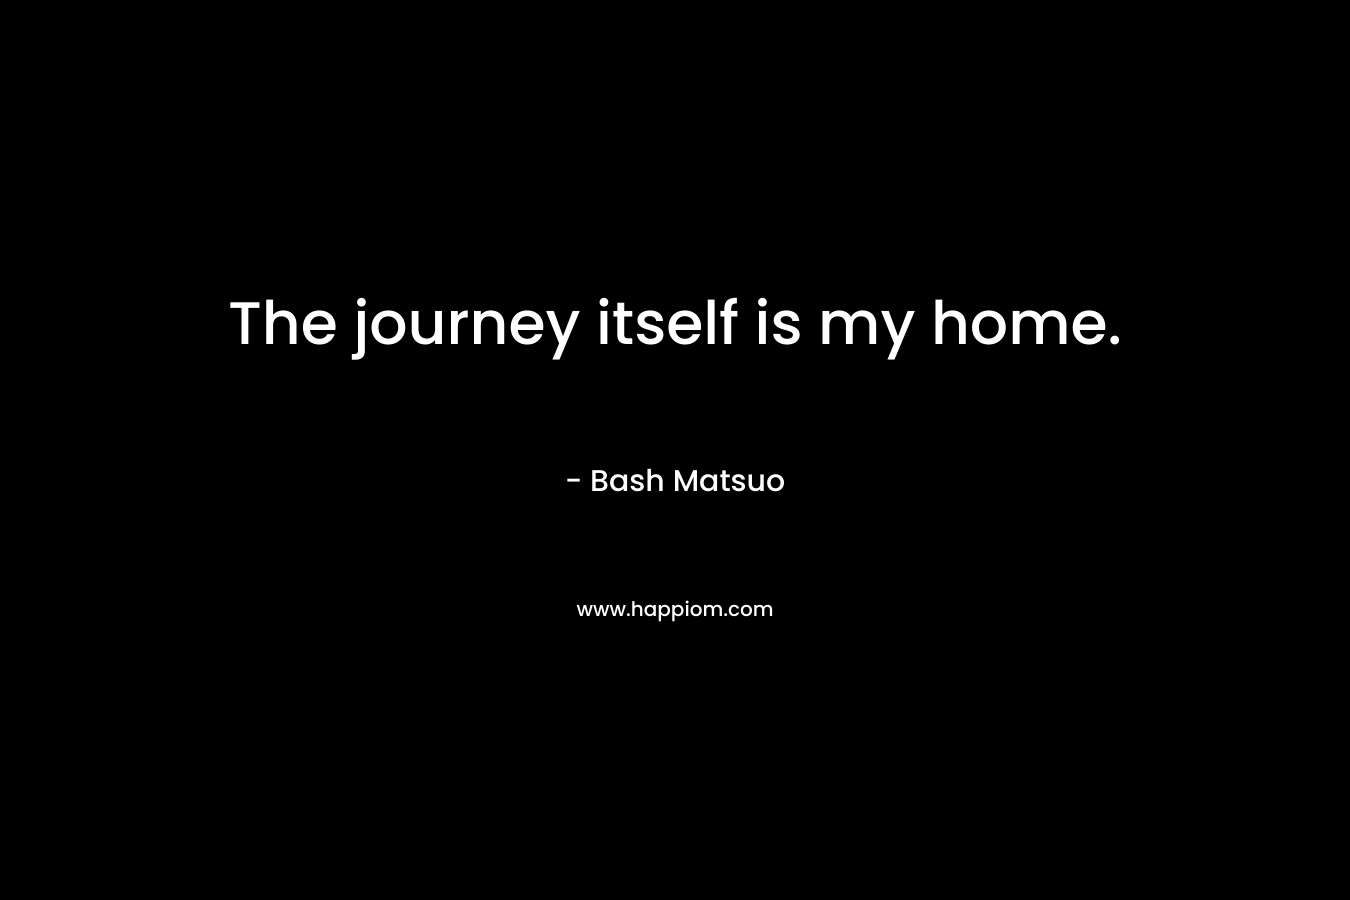 The journey itself is my home.